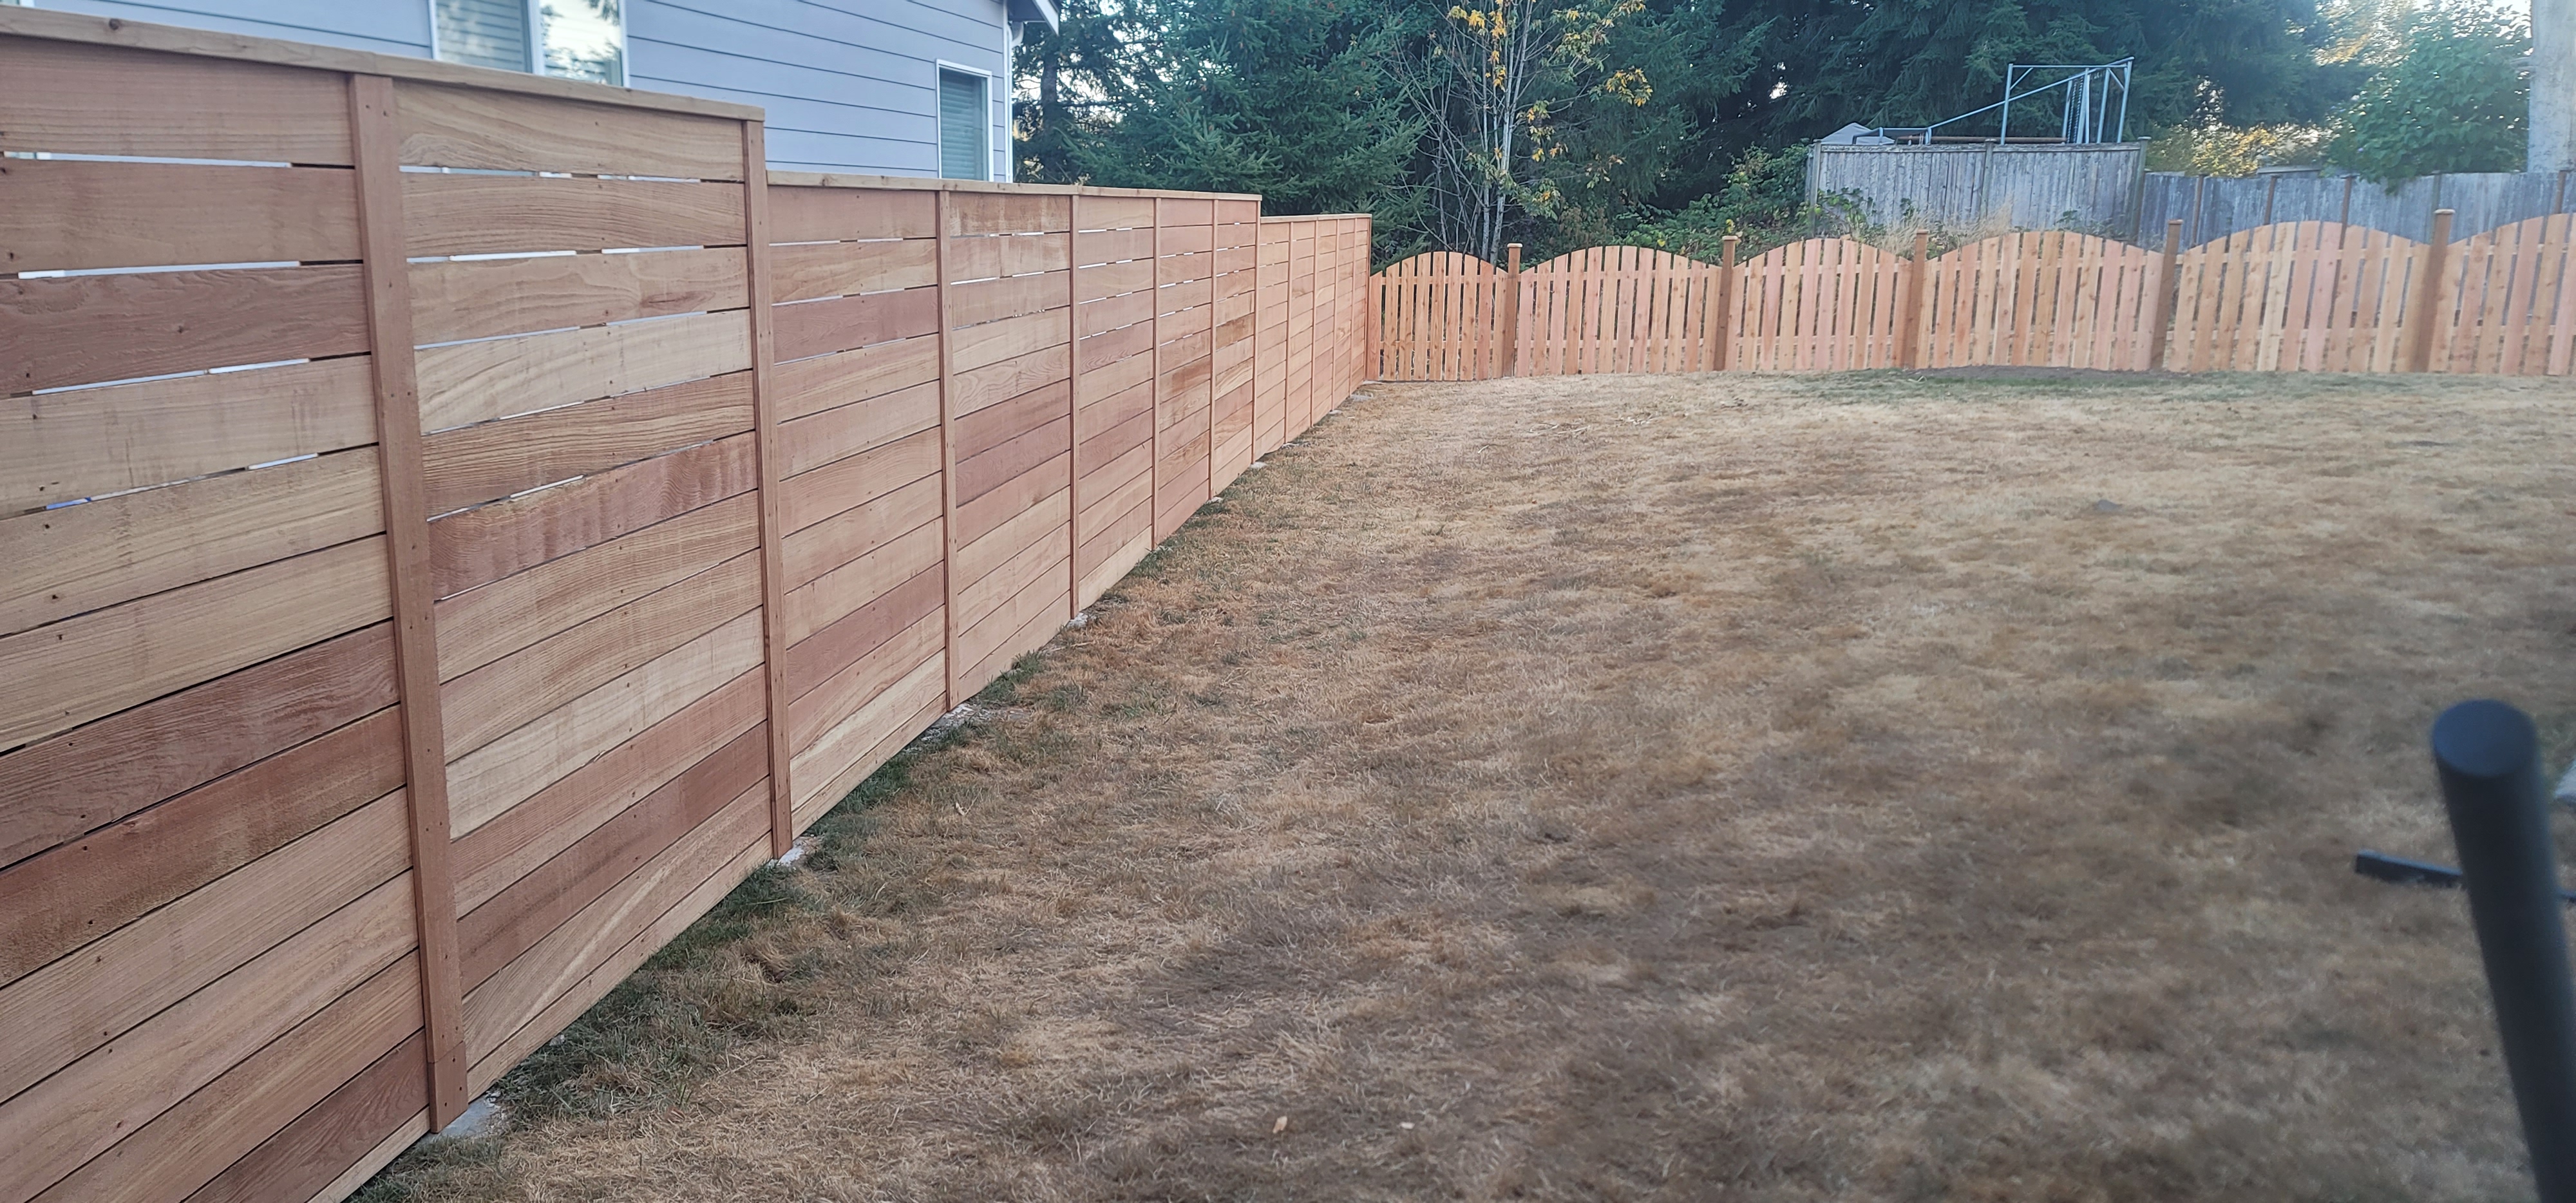 6'FT HORIZONTAL CEDAR FENCE WITH CLEAR BOARDS.